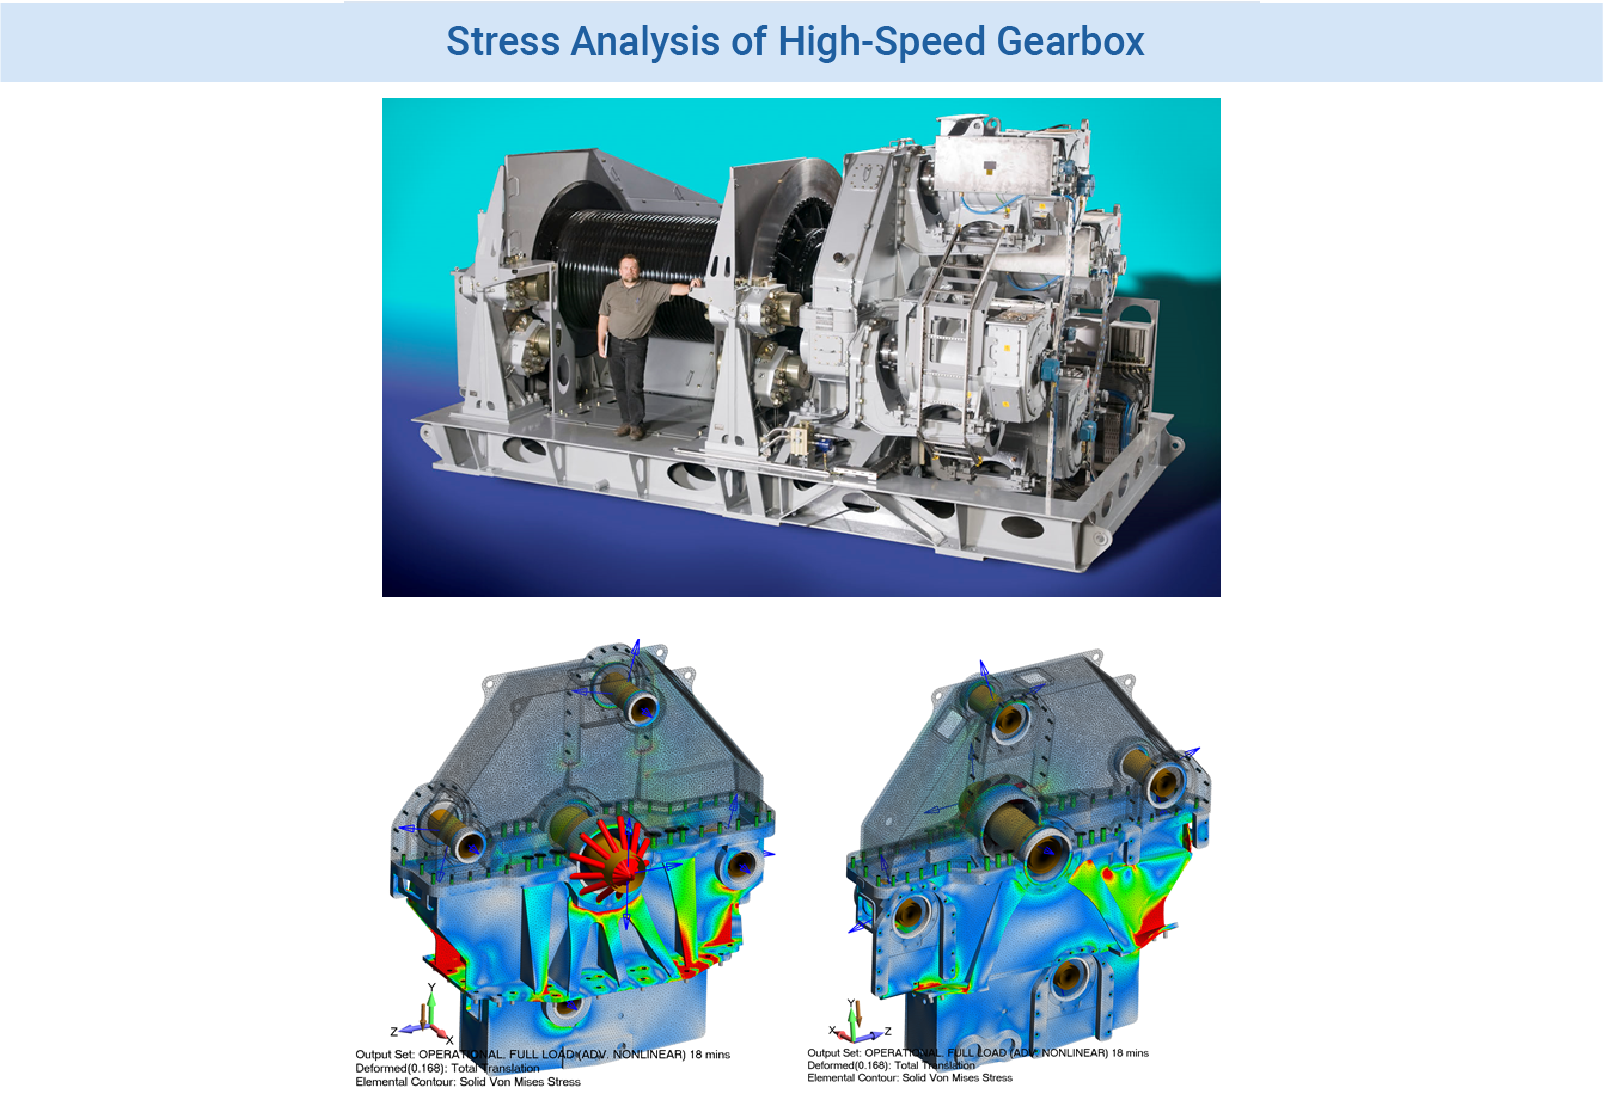 FEA Simulation - Gearbox Analysis for High-Speed Off-Shore Winch - FEA Services - Digital Protyping of Gearboxes and Transmissions